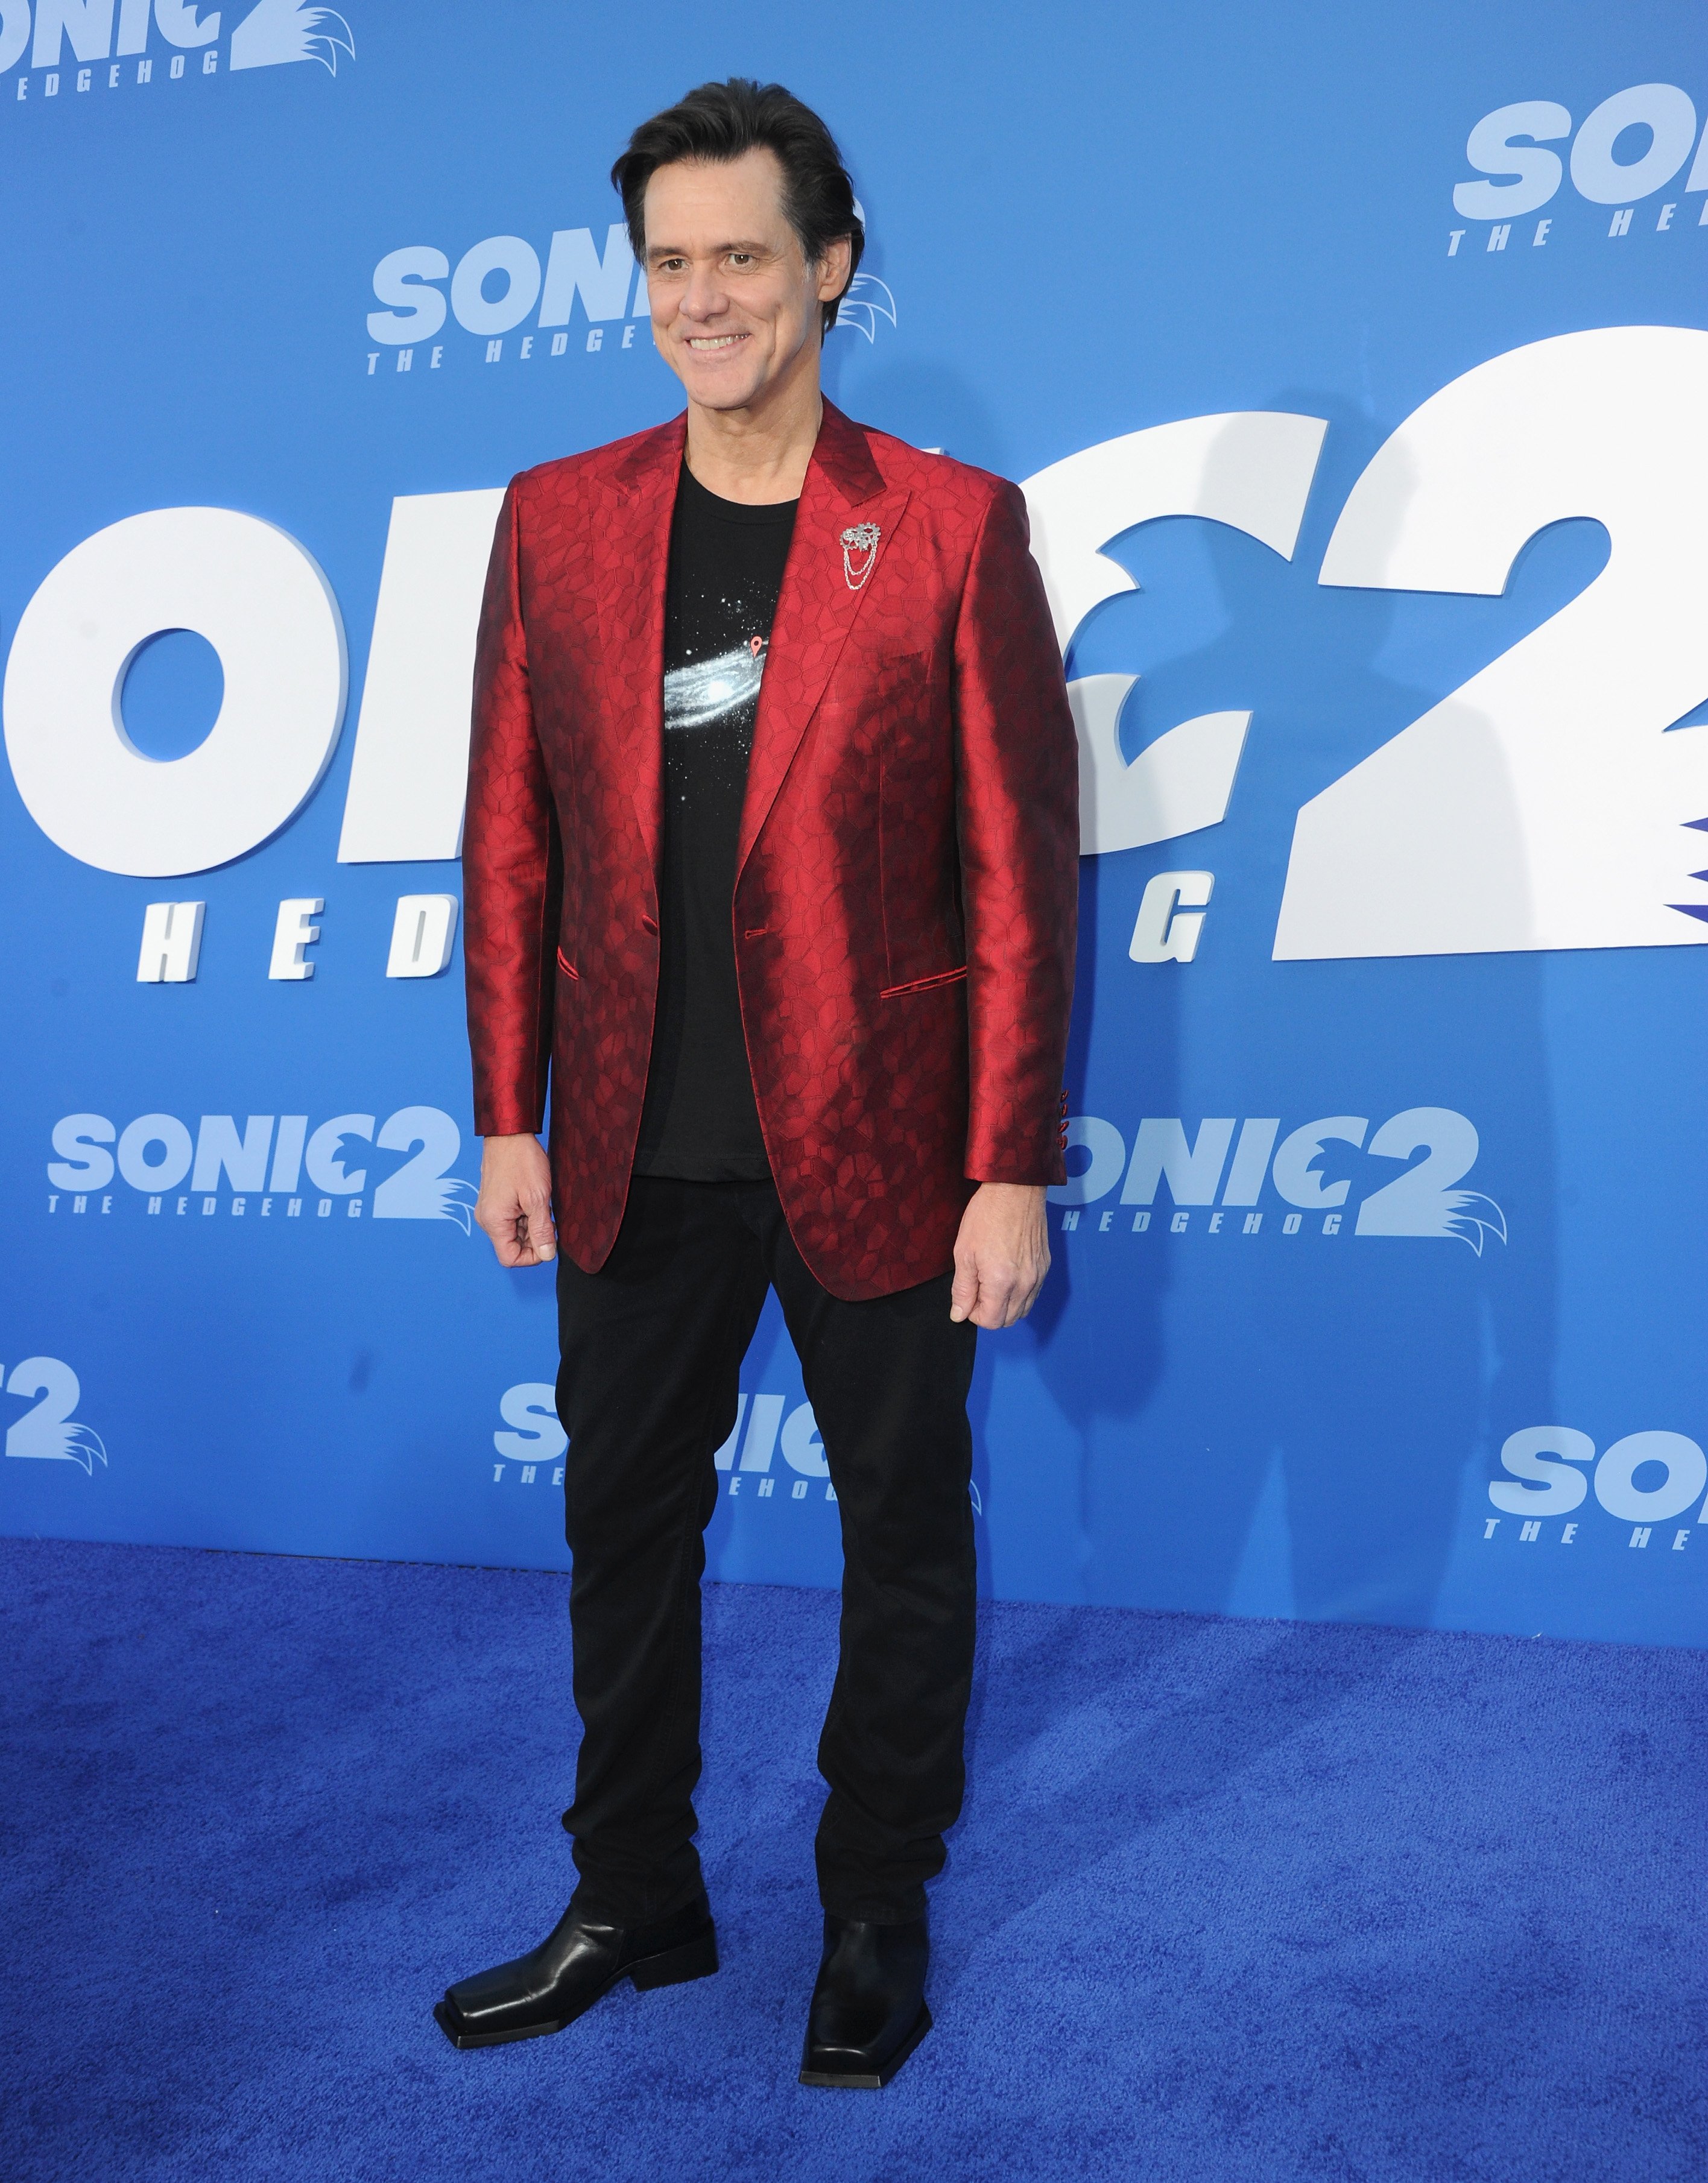 Jim Carrey at the screening of "Sonic The Hedgehog 2" on April 5, 2022, in California | Source: Getty Images